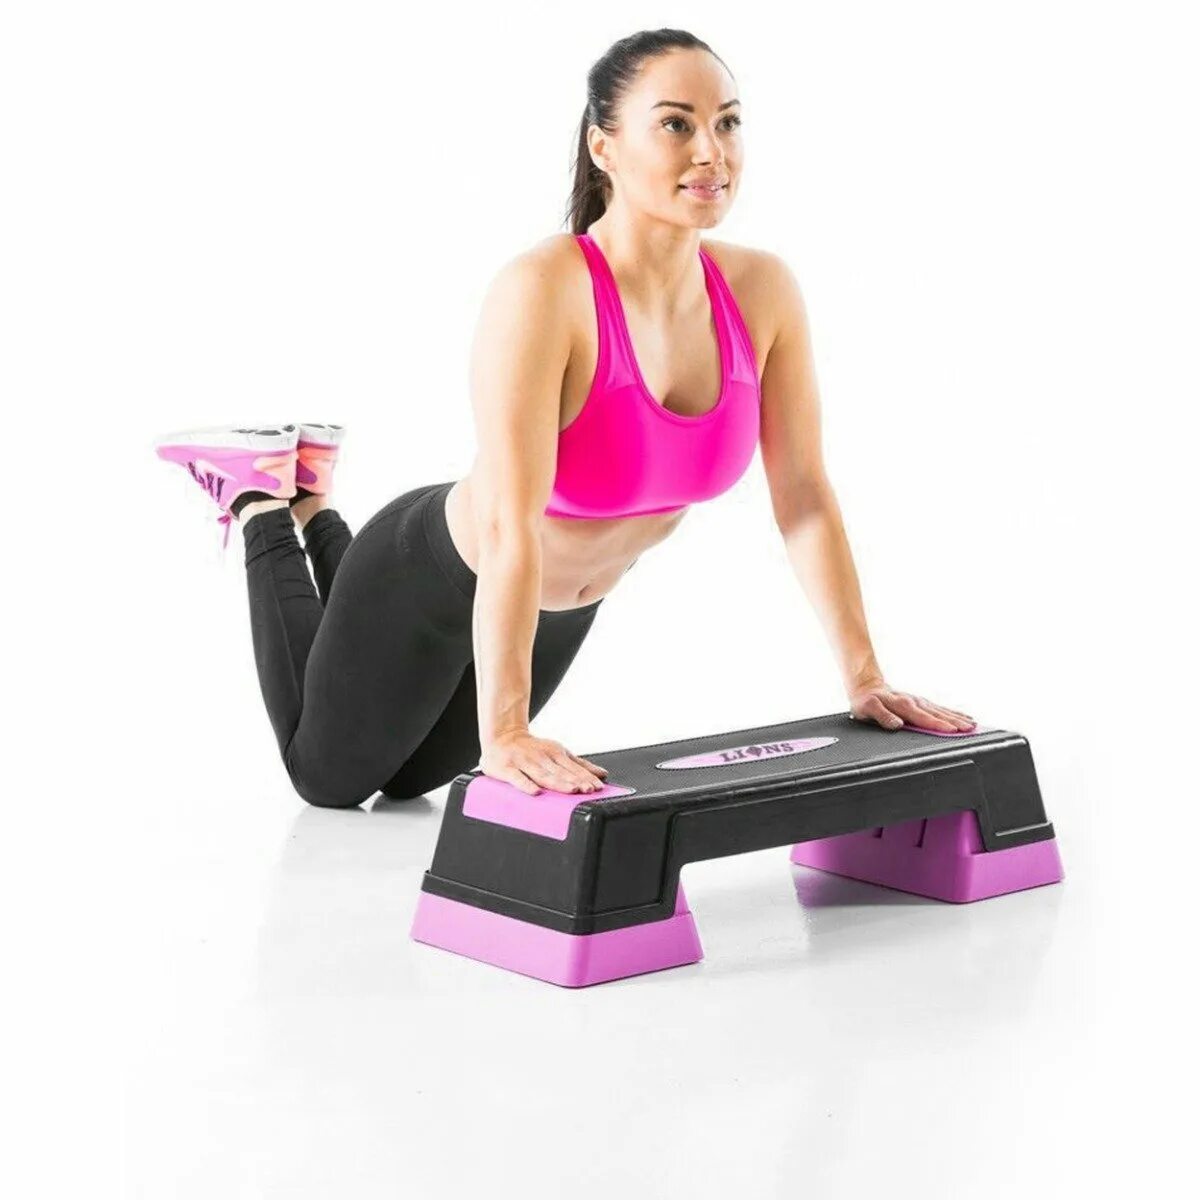 Step your up. Aerobic Step степ платформа. Степ-платформа Тривес м-601. Степ платформа Gymstick Pro 97cm. Aerobic Step степ платформа с резинками.